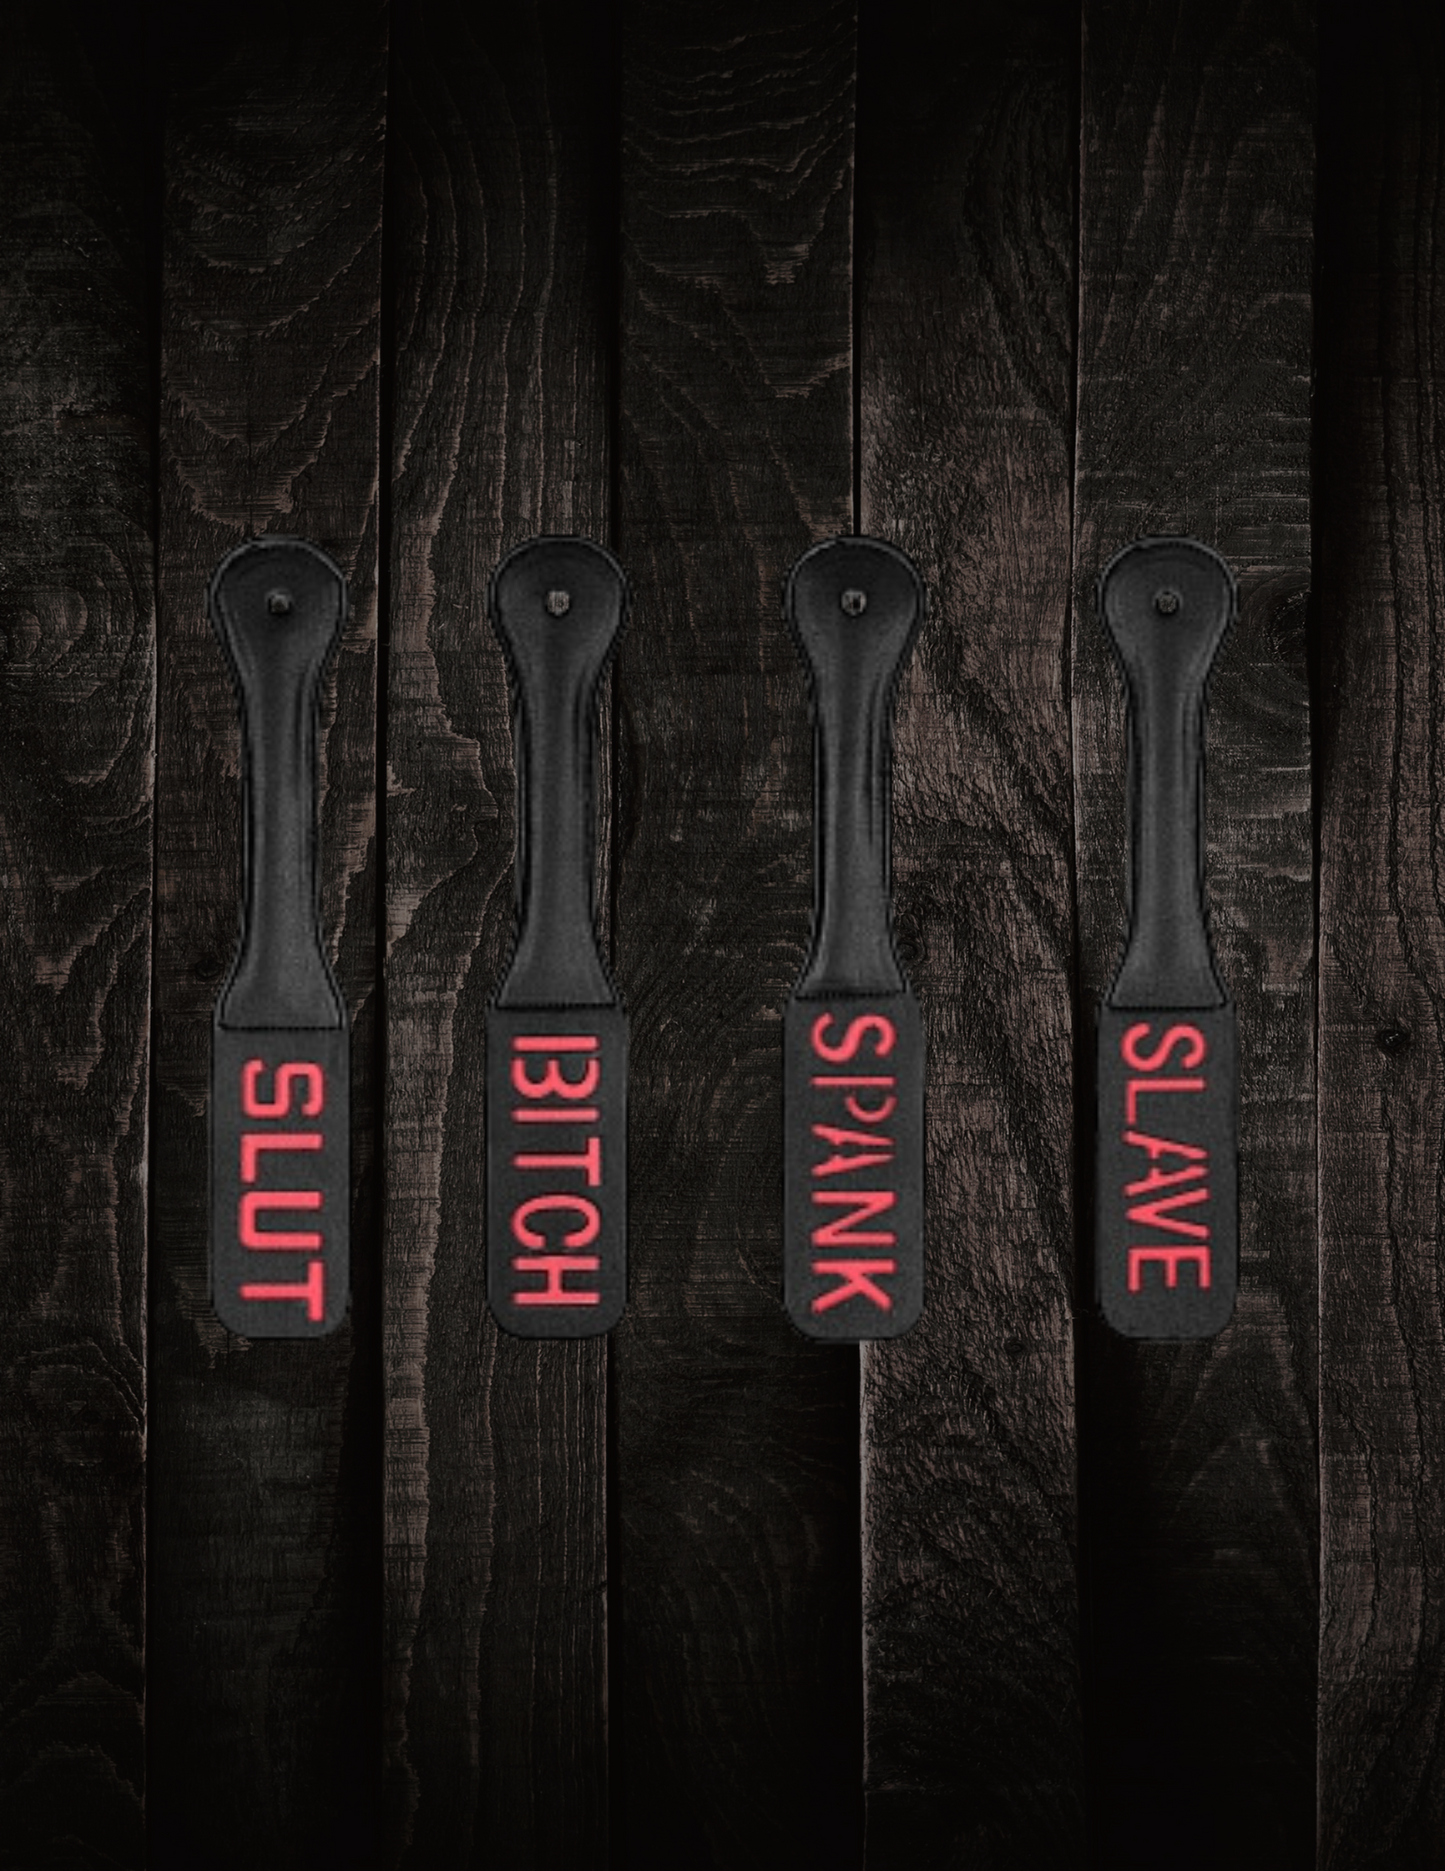 Group images of the Ouch! Bonded Leather Paddles from Shots.